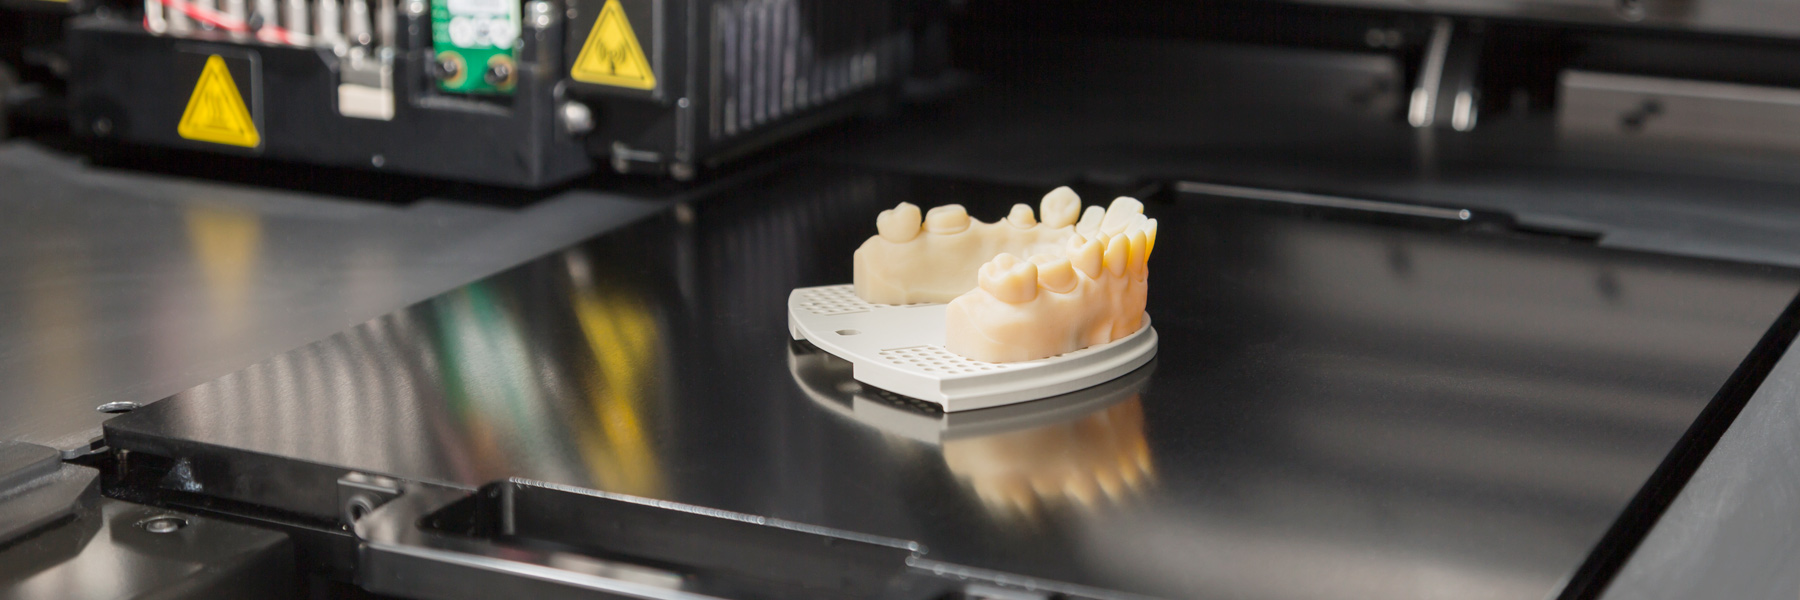 A close-up of a silicone teeth mold sitting on a metal platform